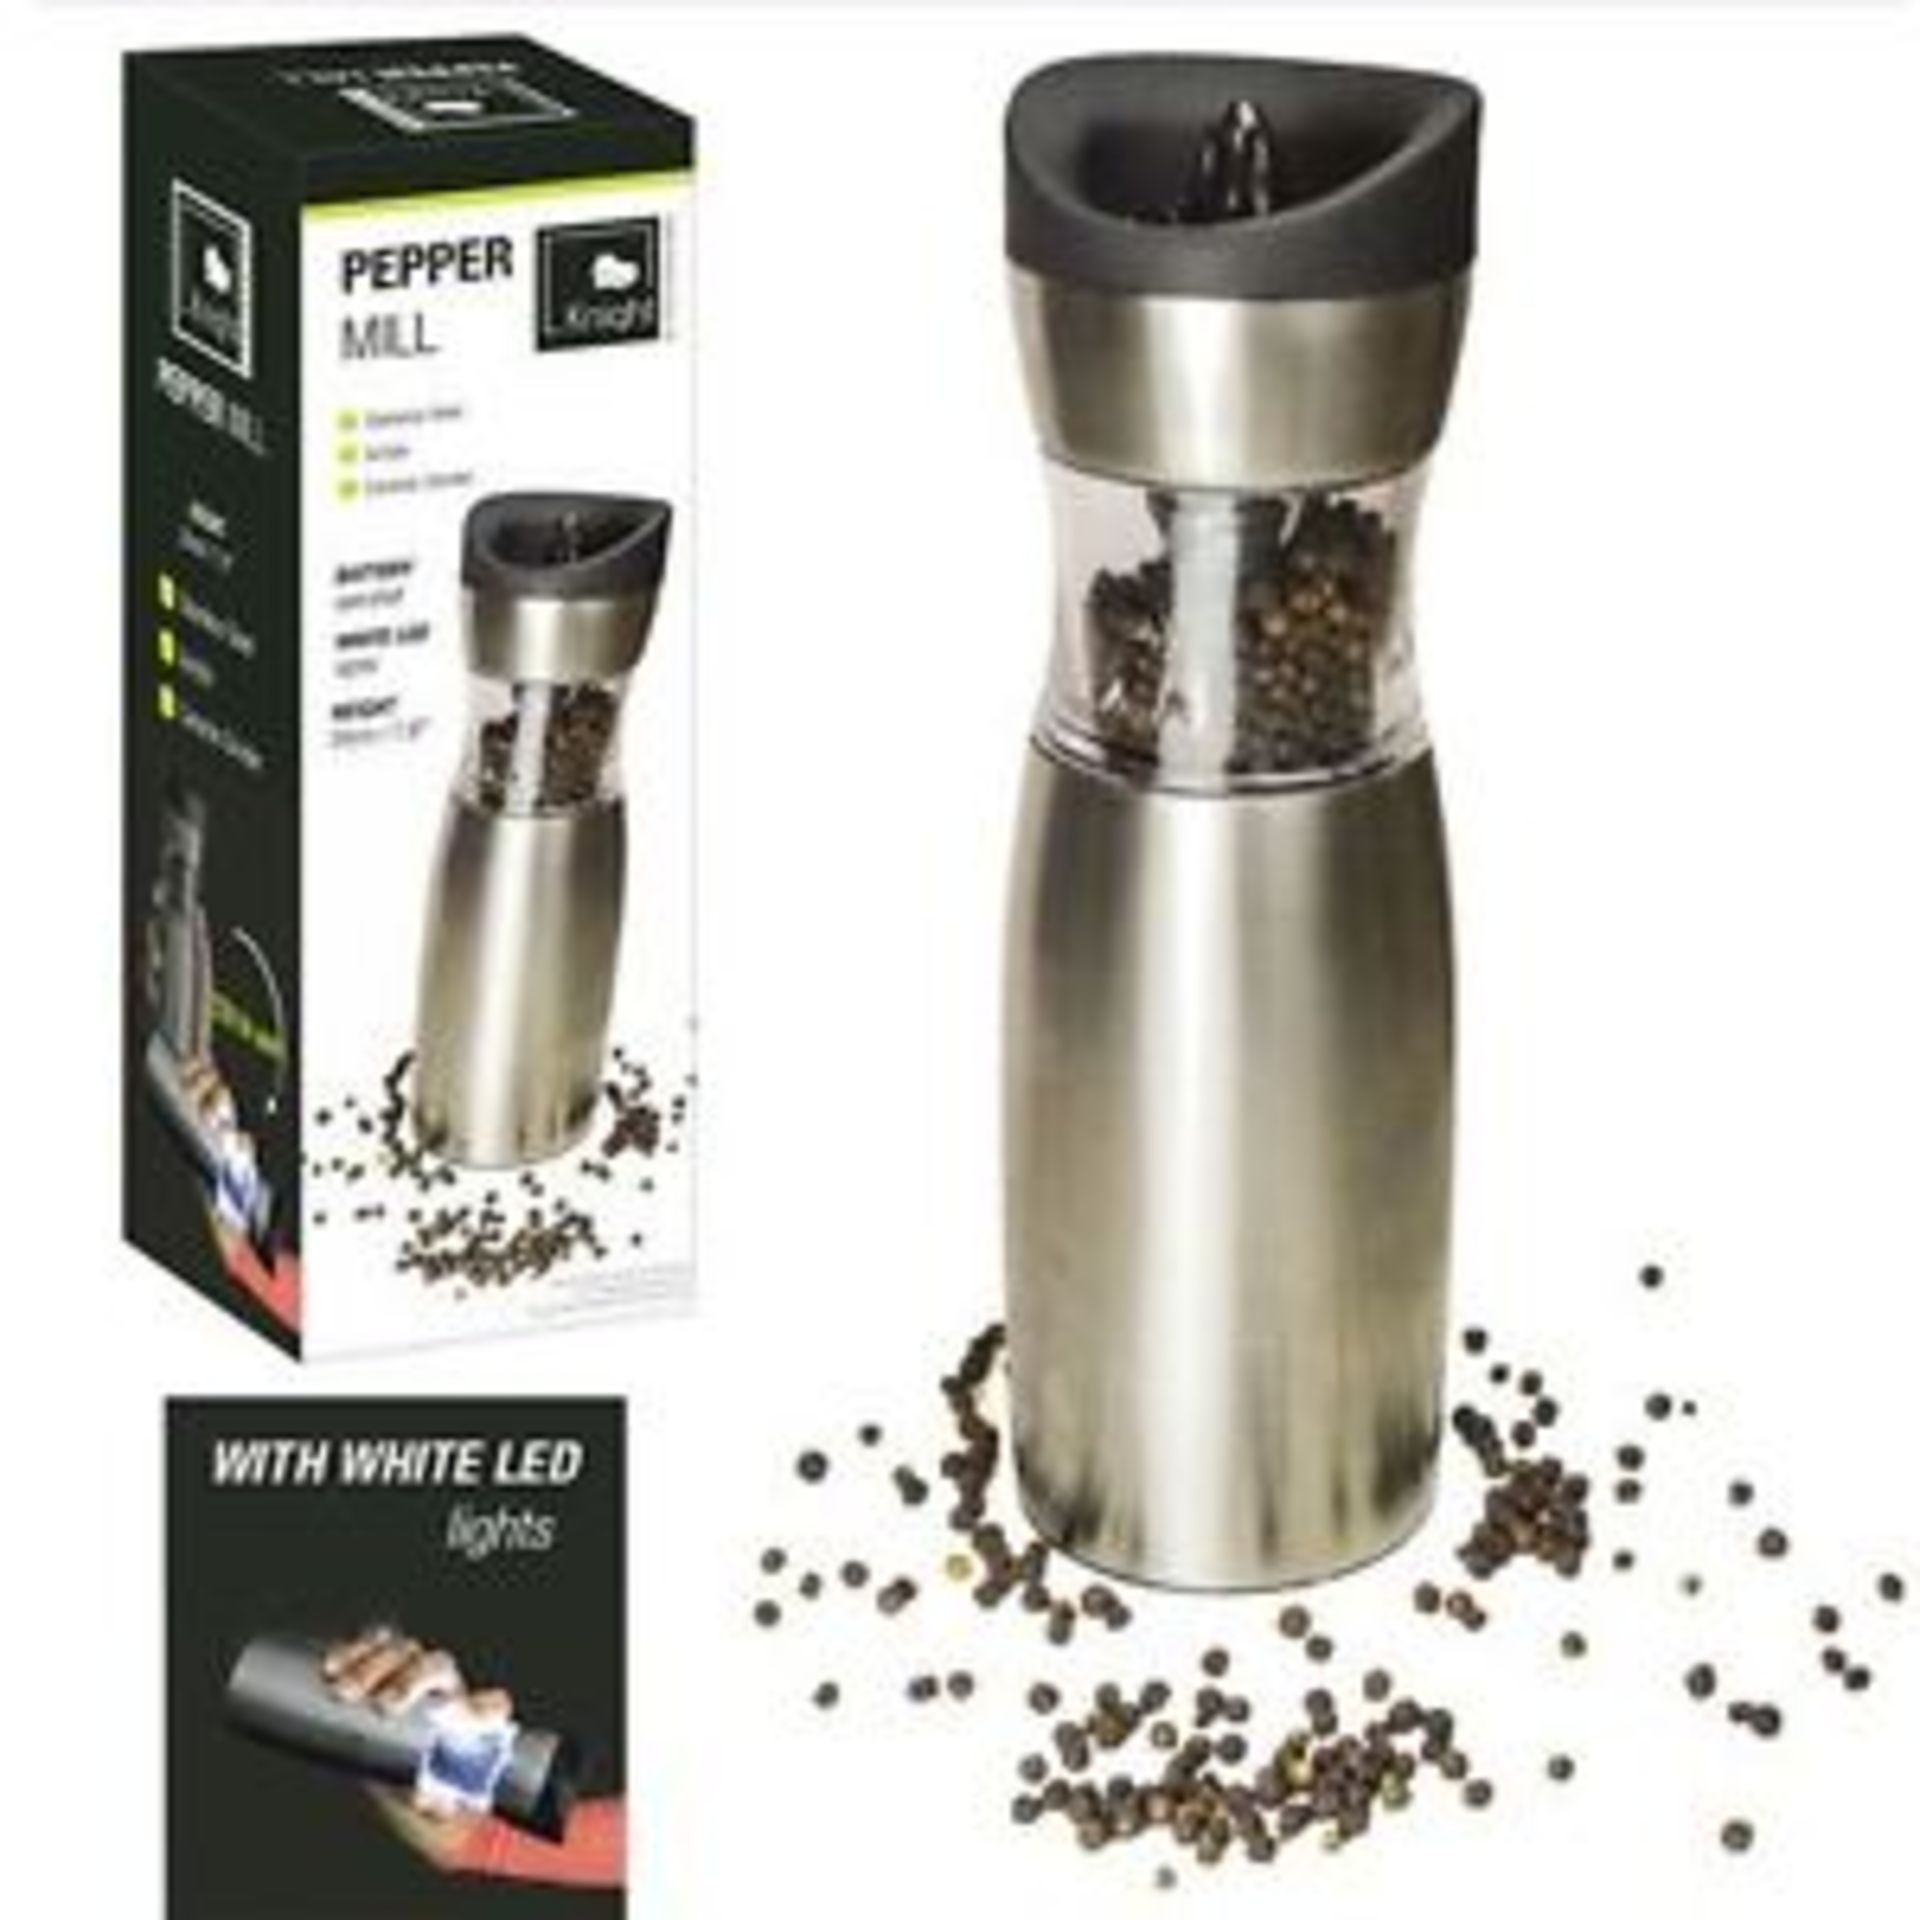 V Brand New 20cm Electronic Pepper Mill With White LED Light Stainless Steel-Acrylic-Ceramic